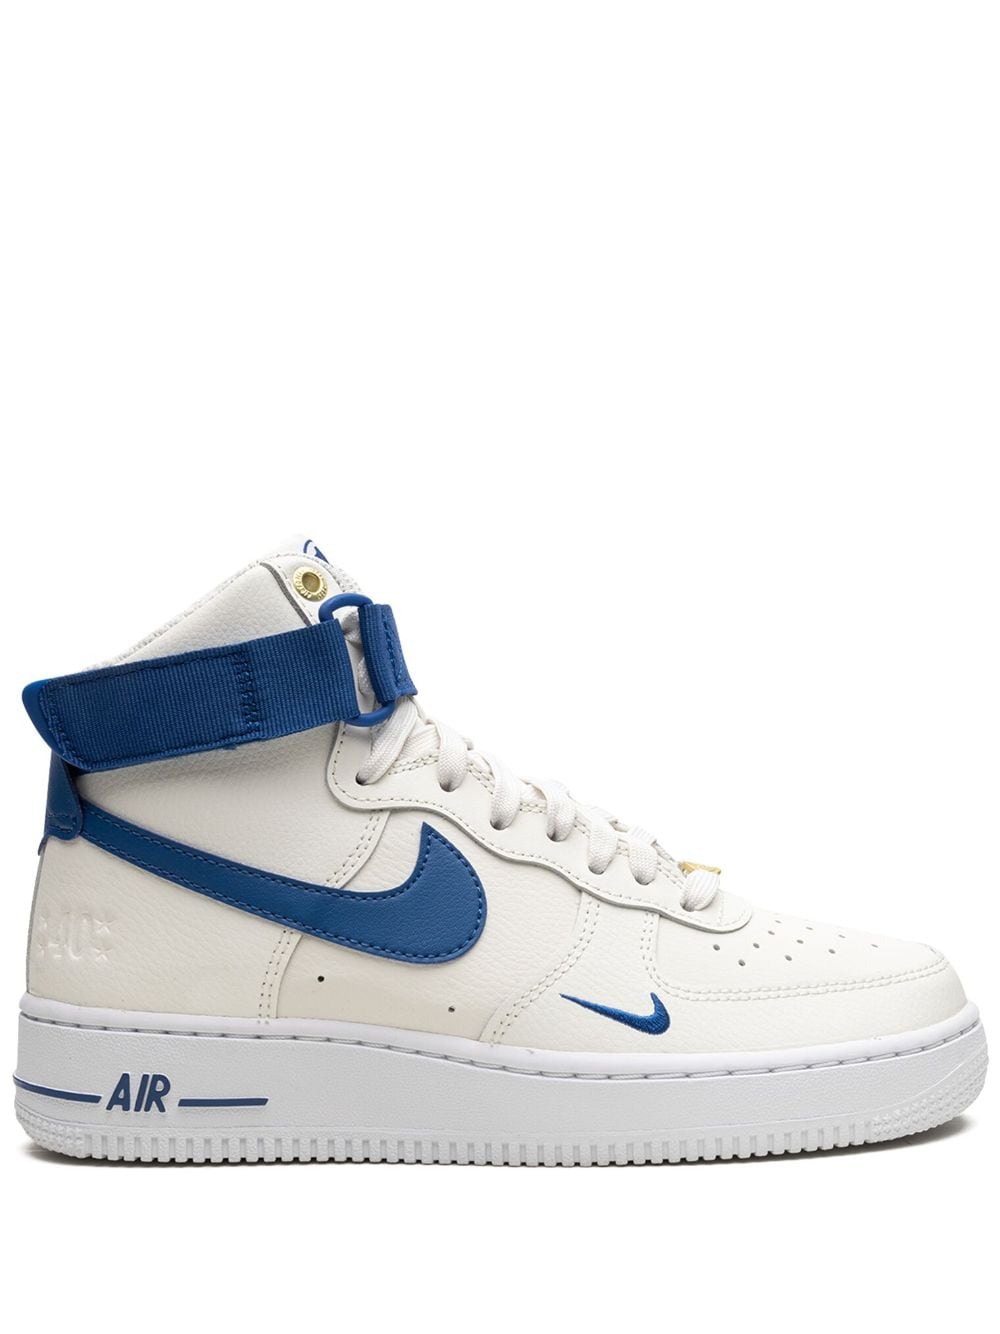 Nike Air Force 1 High Sneakers In White